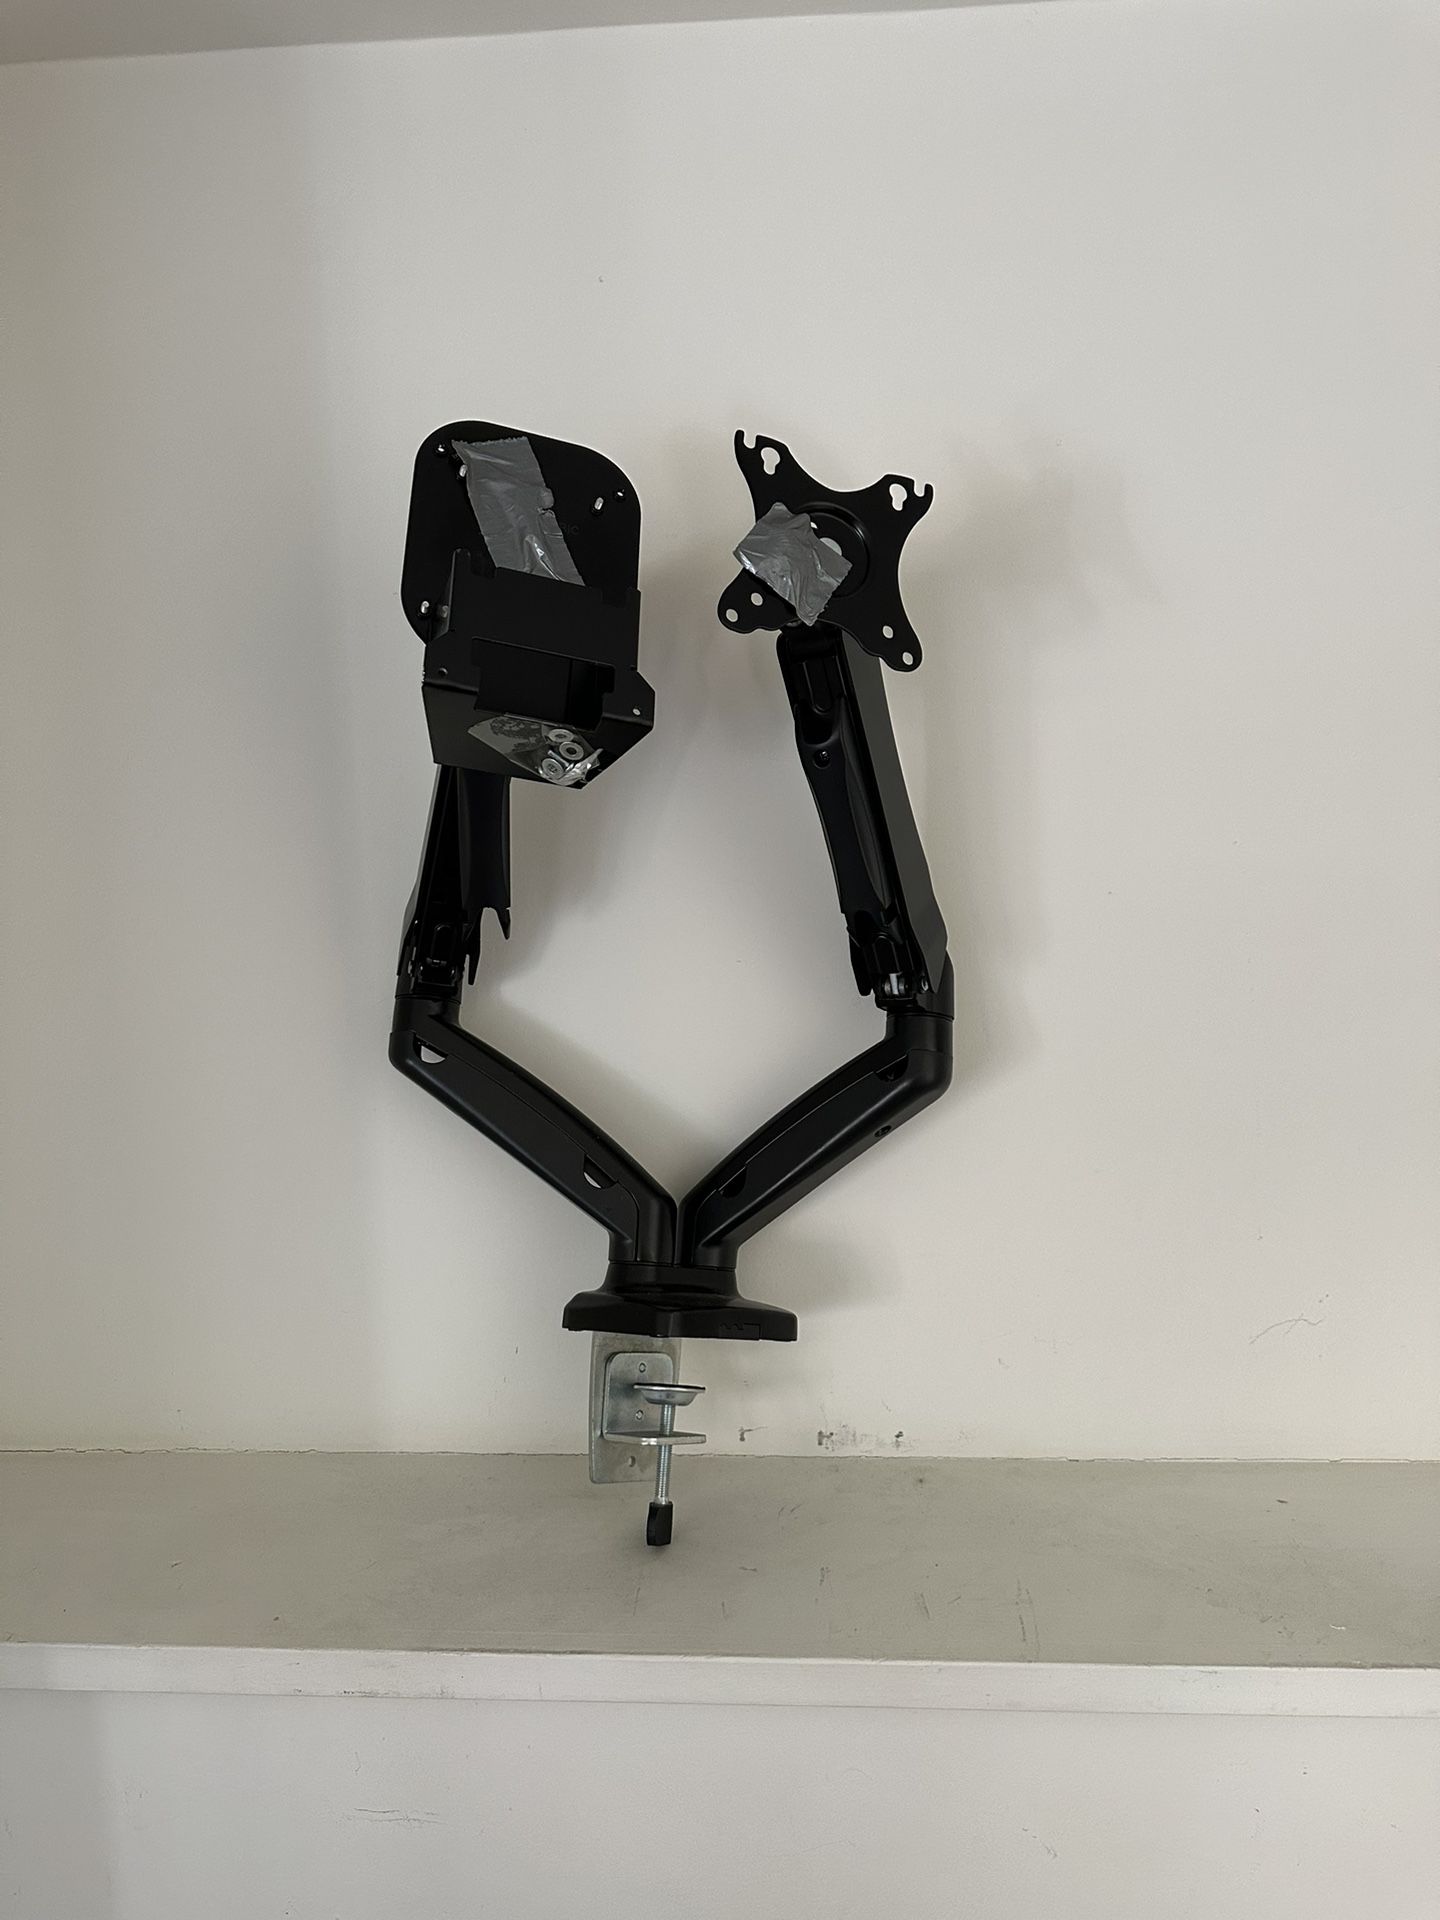 Dual Monitor Mount. Excellent Condition. Make An Offer.